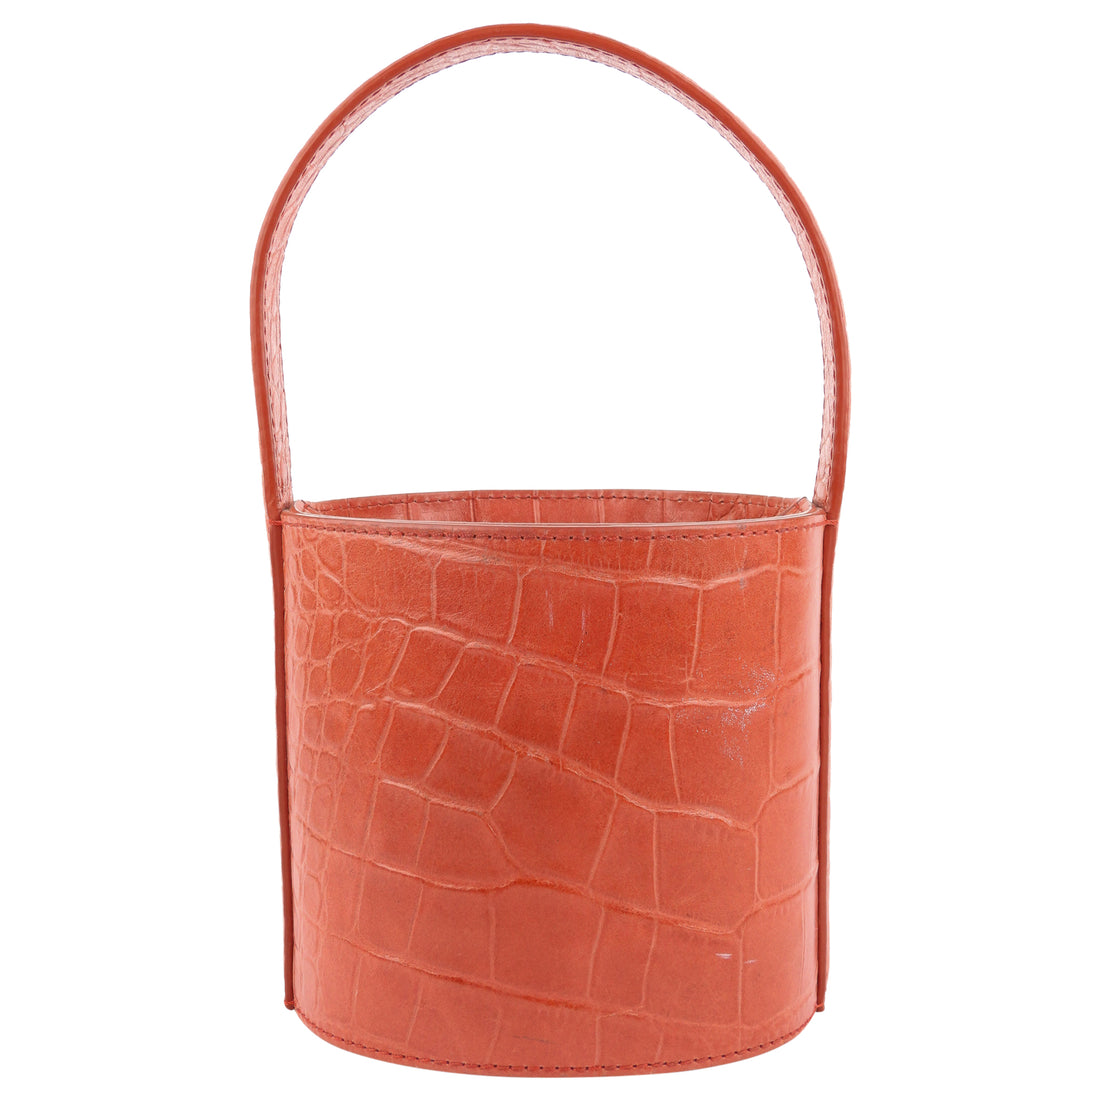 Staud Red Croc Embossed Leather Two Way Bucket Bag